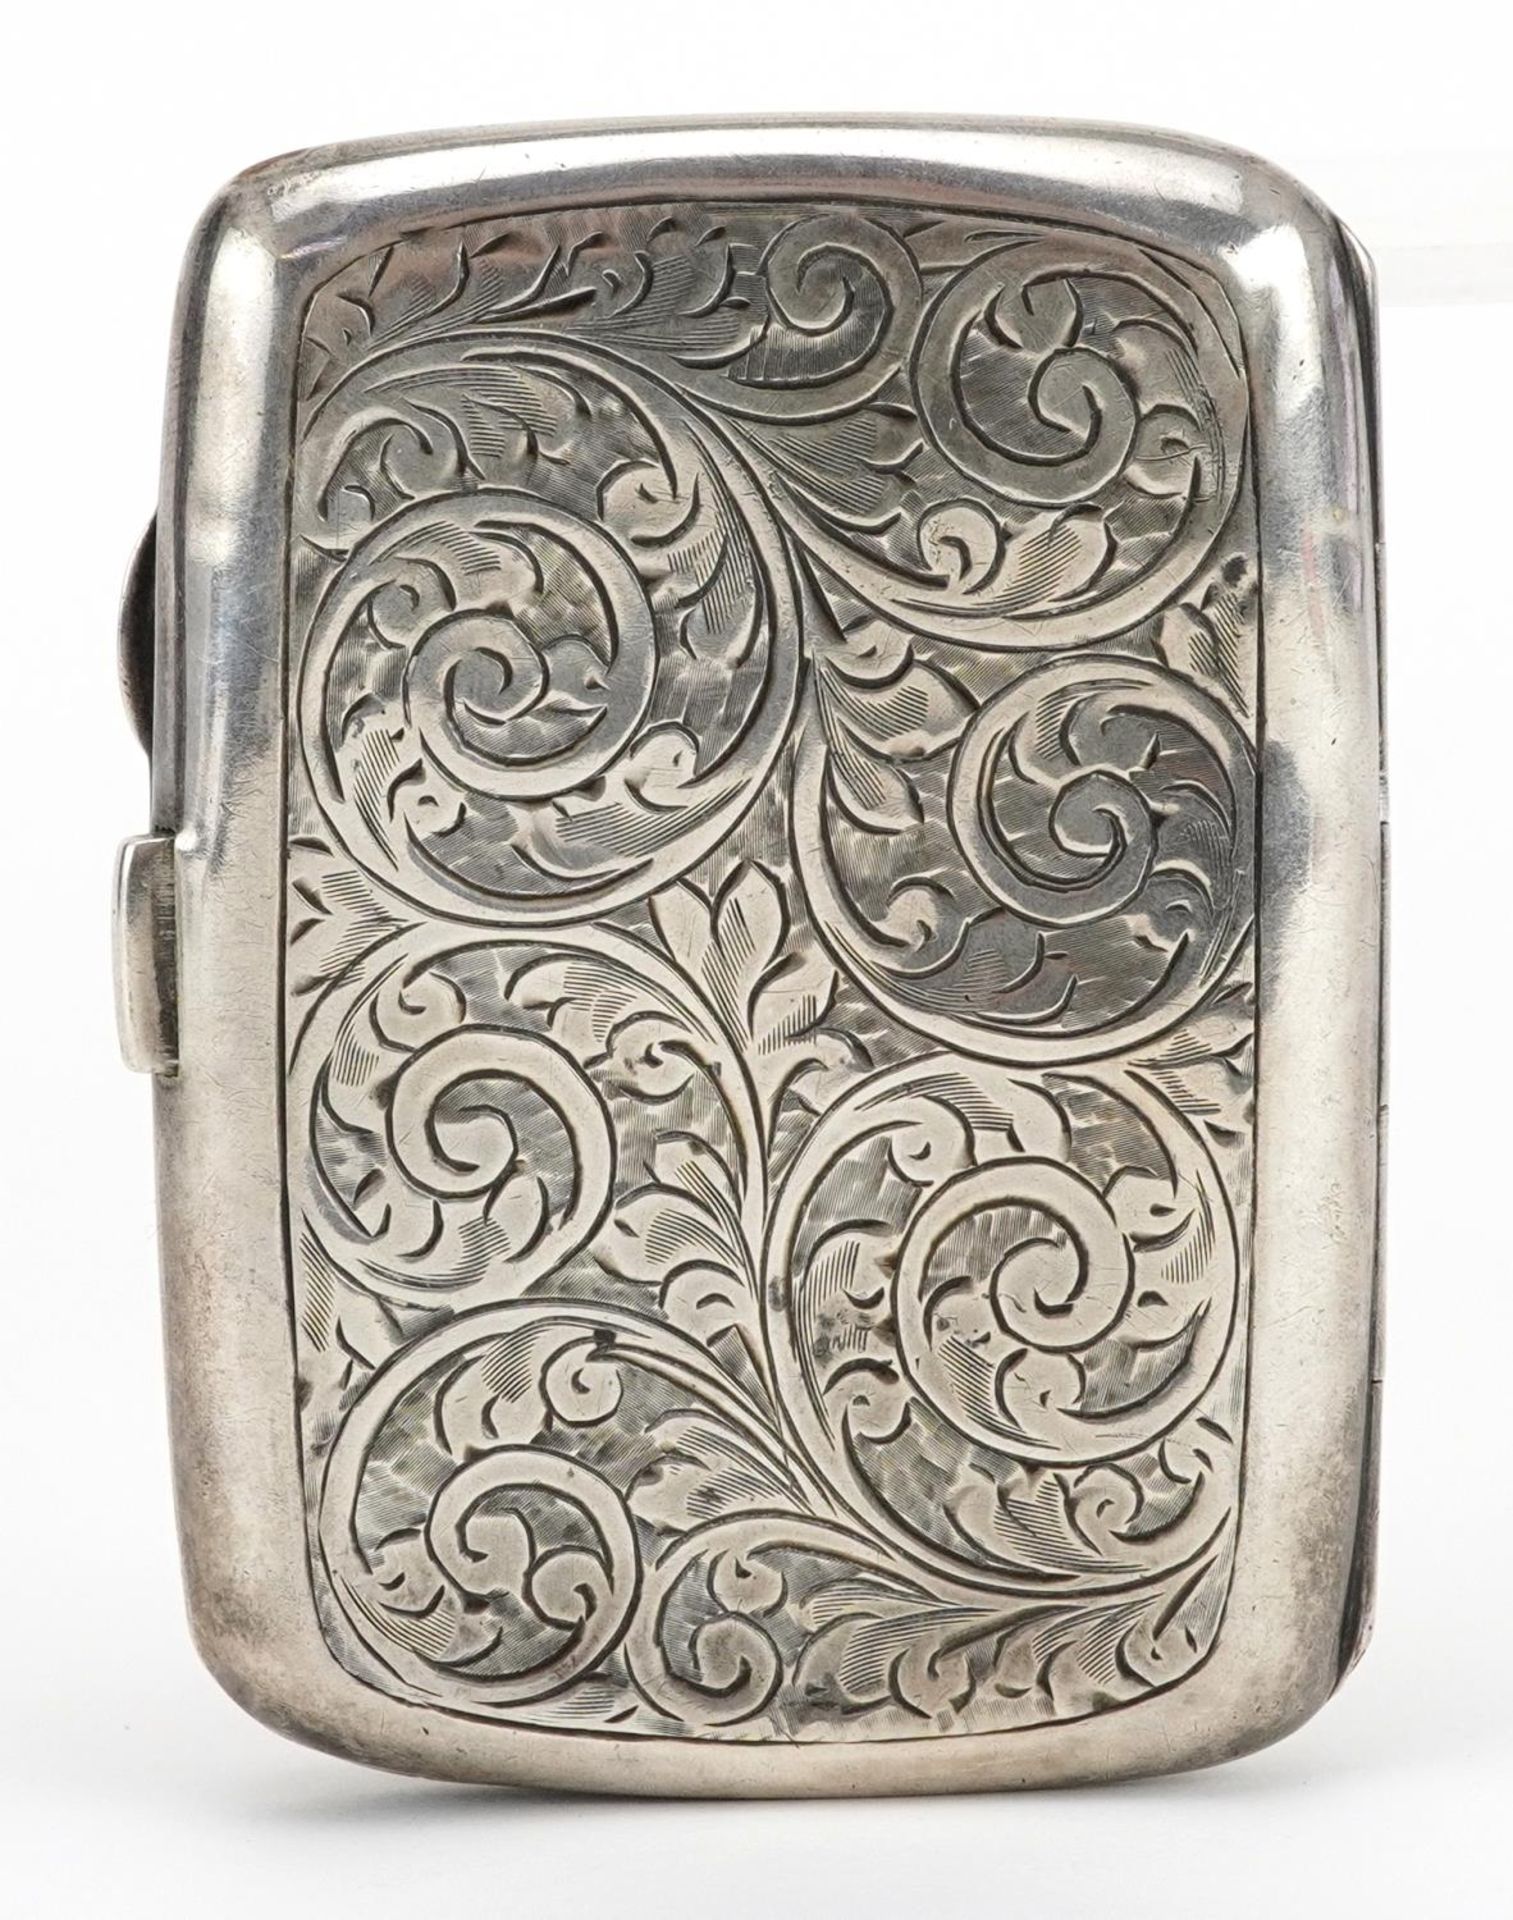 S Blanckensee & Son Ltd, George V silver cigarette case engraved with foliage, Chester 1922, 8.5cm - Image 4 of 5